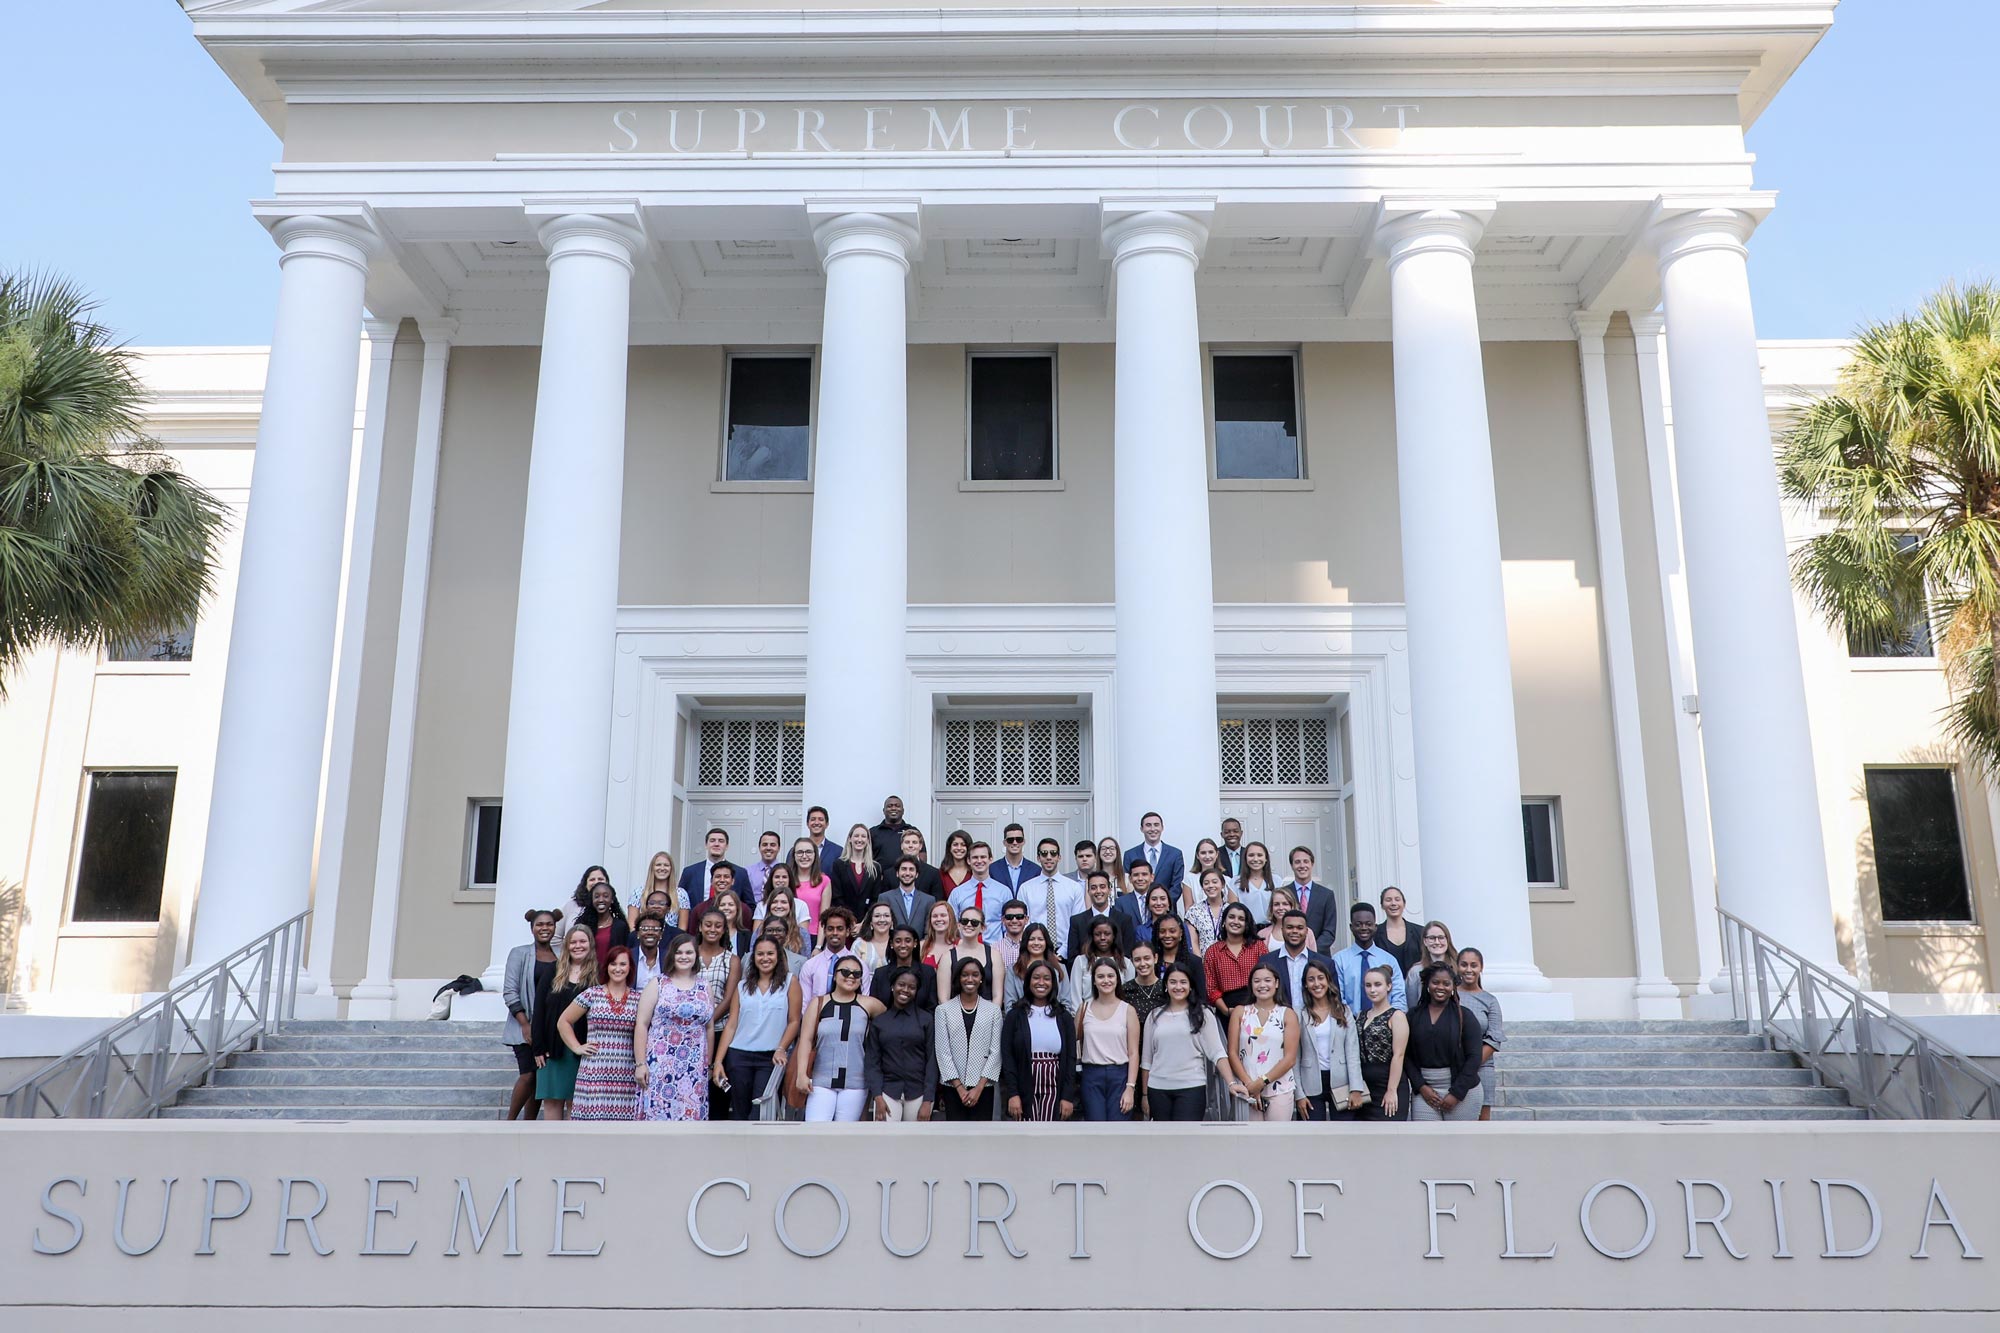 Britney Mangan poses in a group photo in front of the Florida Supreme Court of Florida